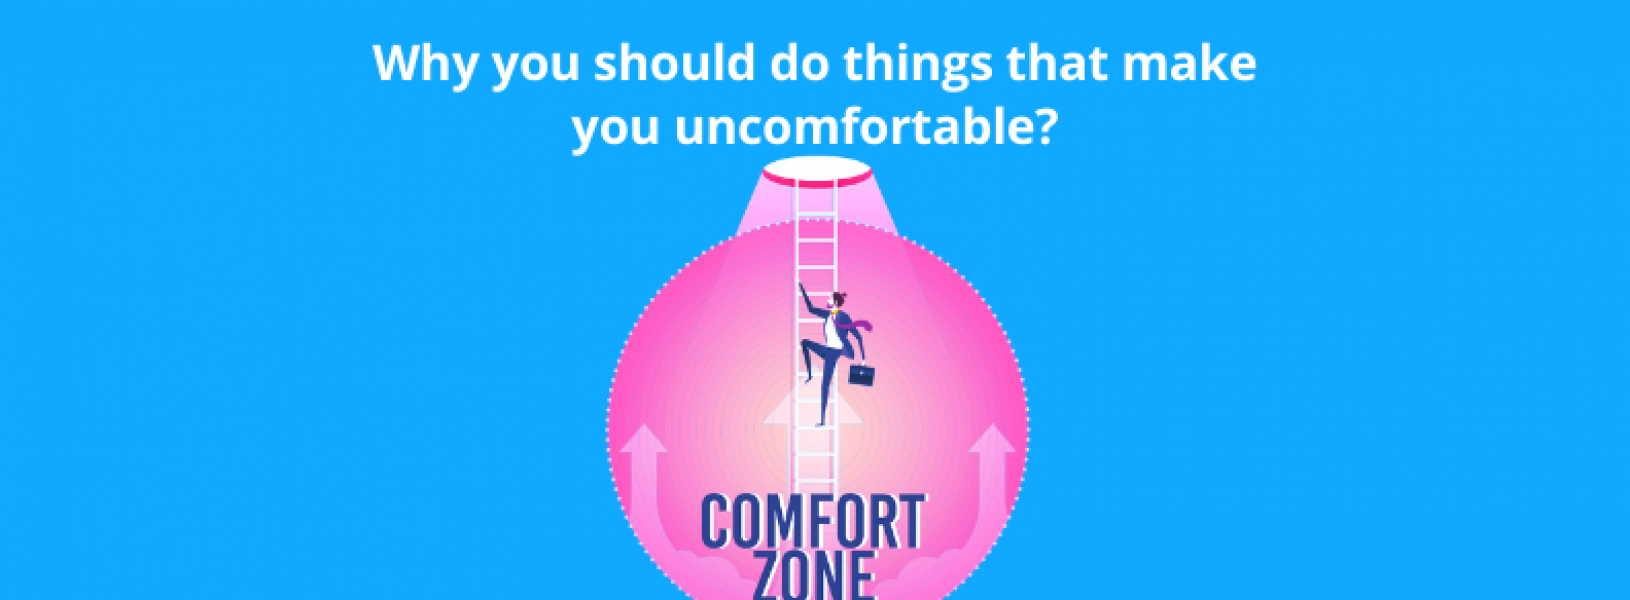 Why You Should Do Things That Make You Uncomfortable Greyb